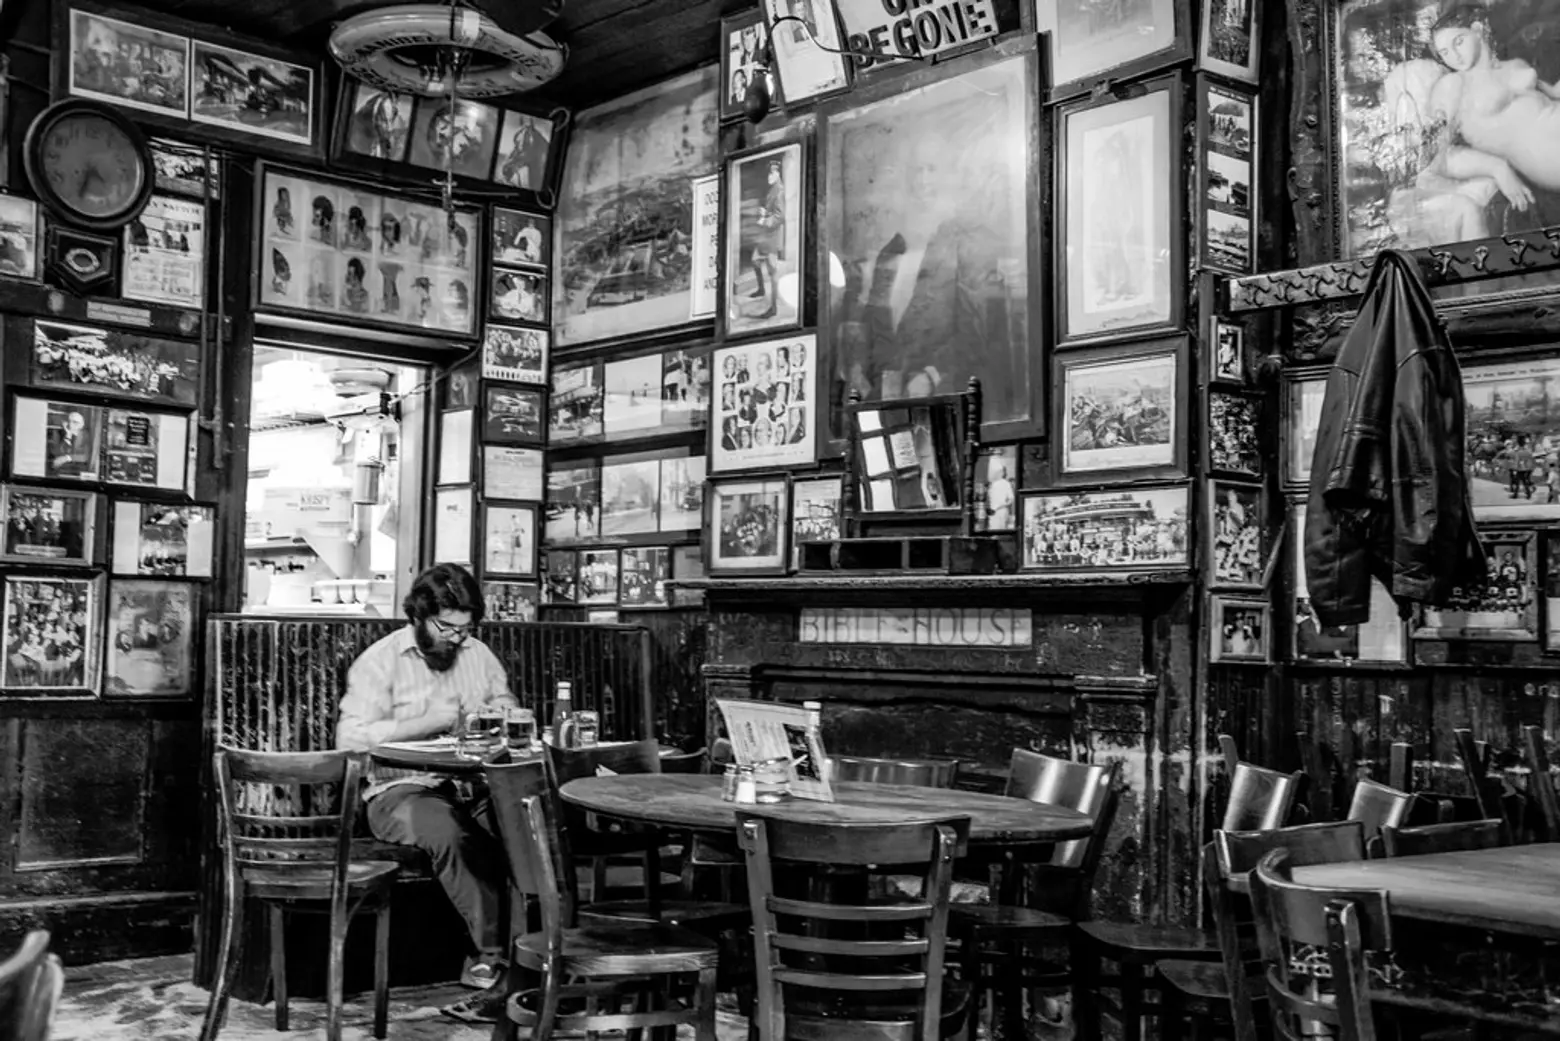 Art covers the walls inside McSorley's.